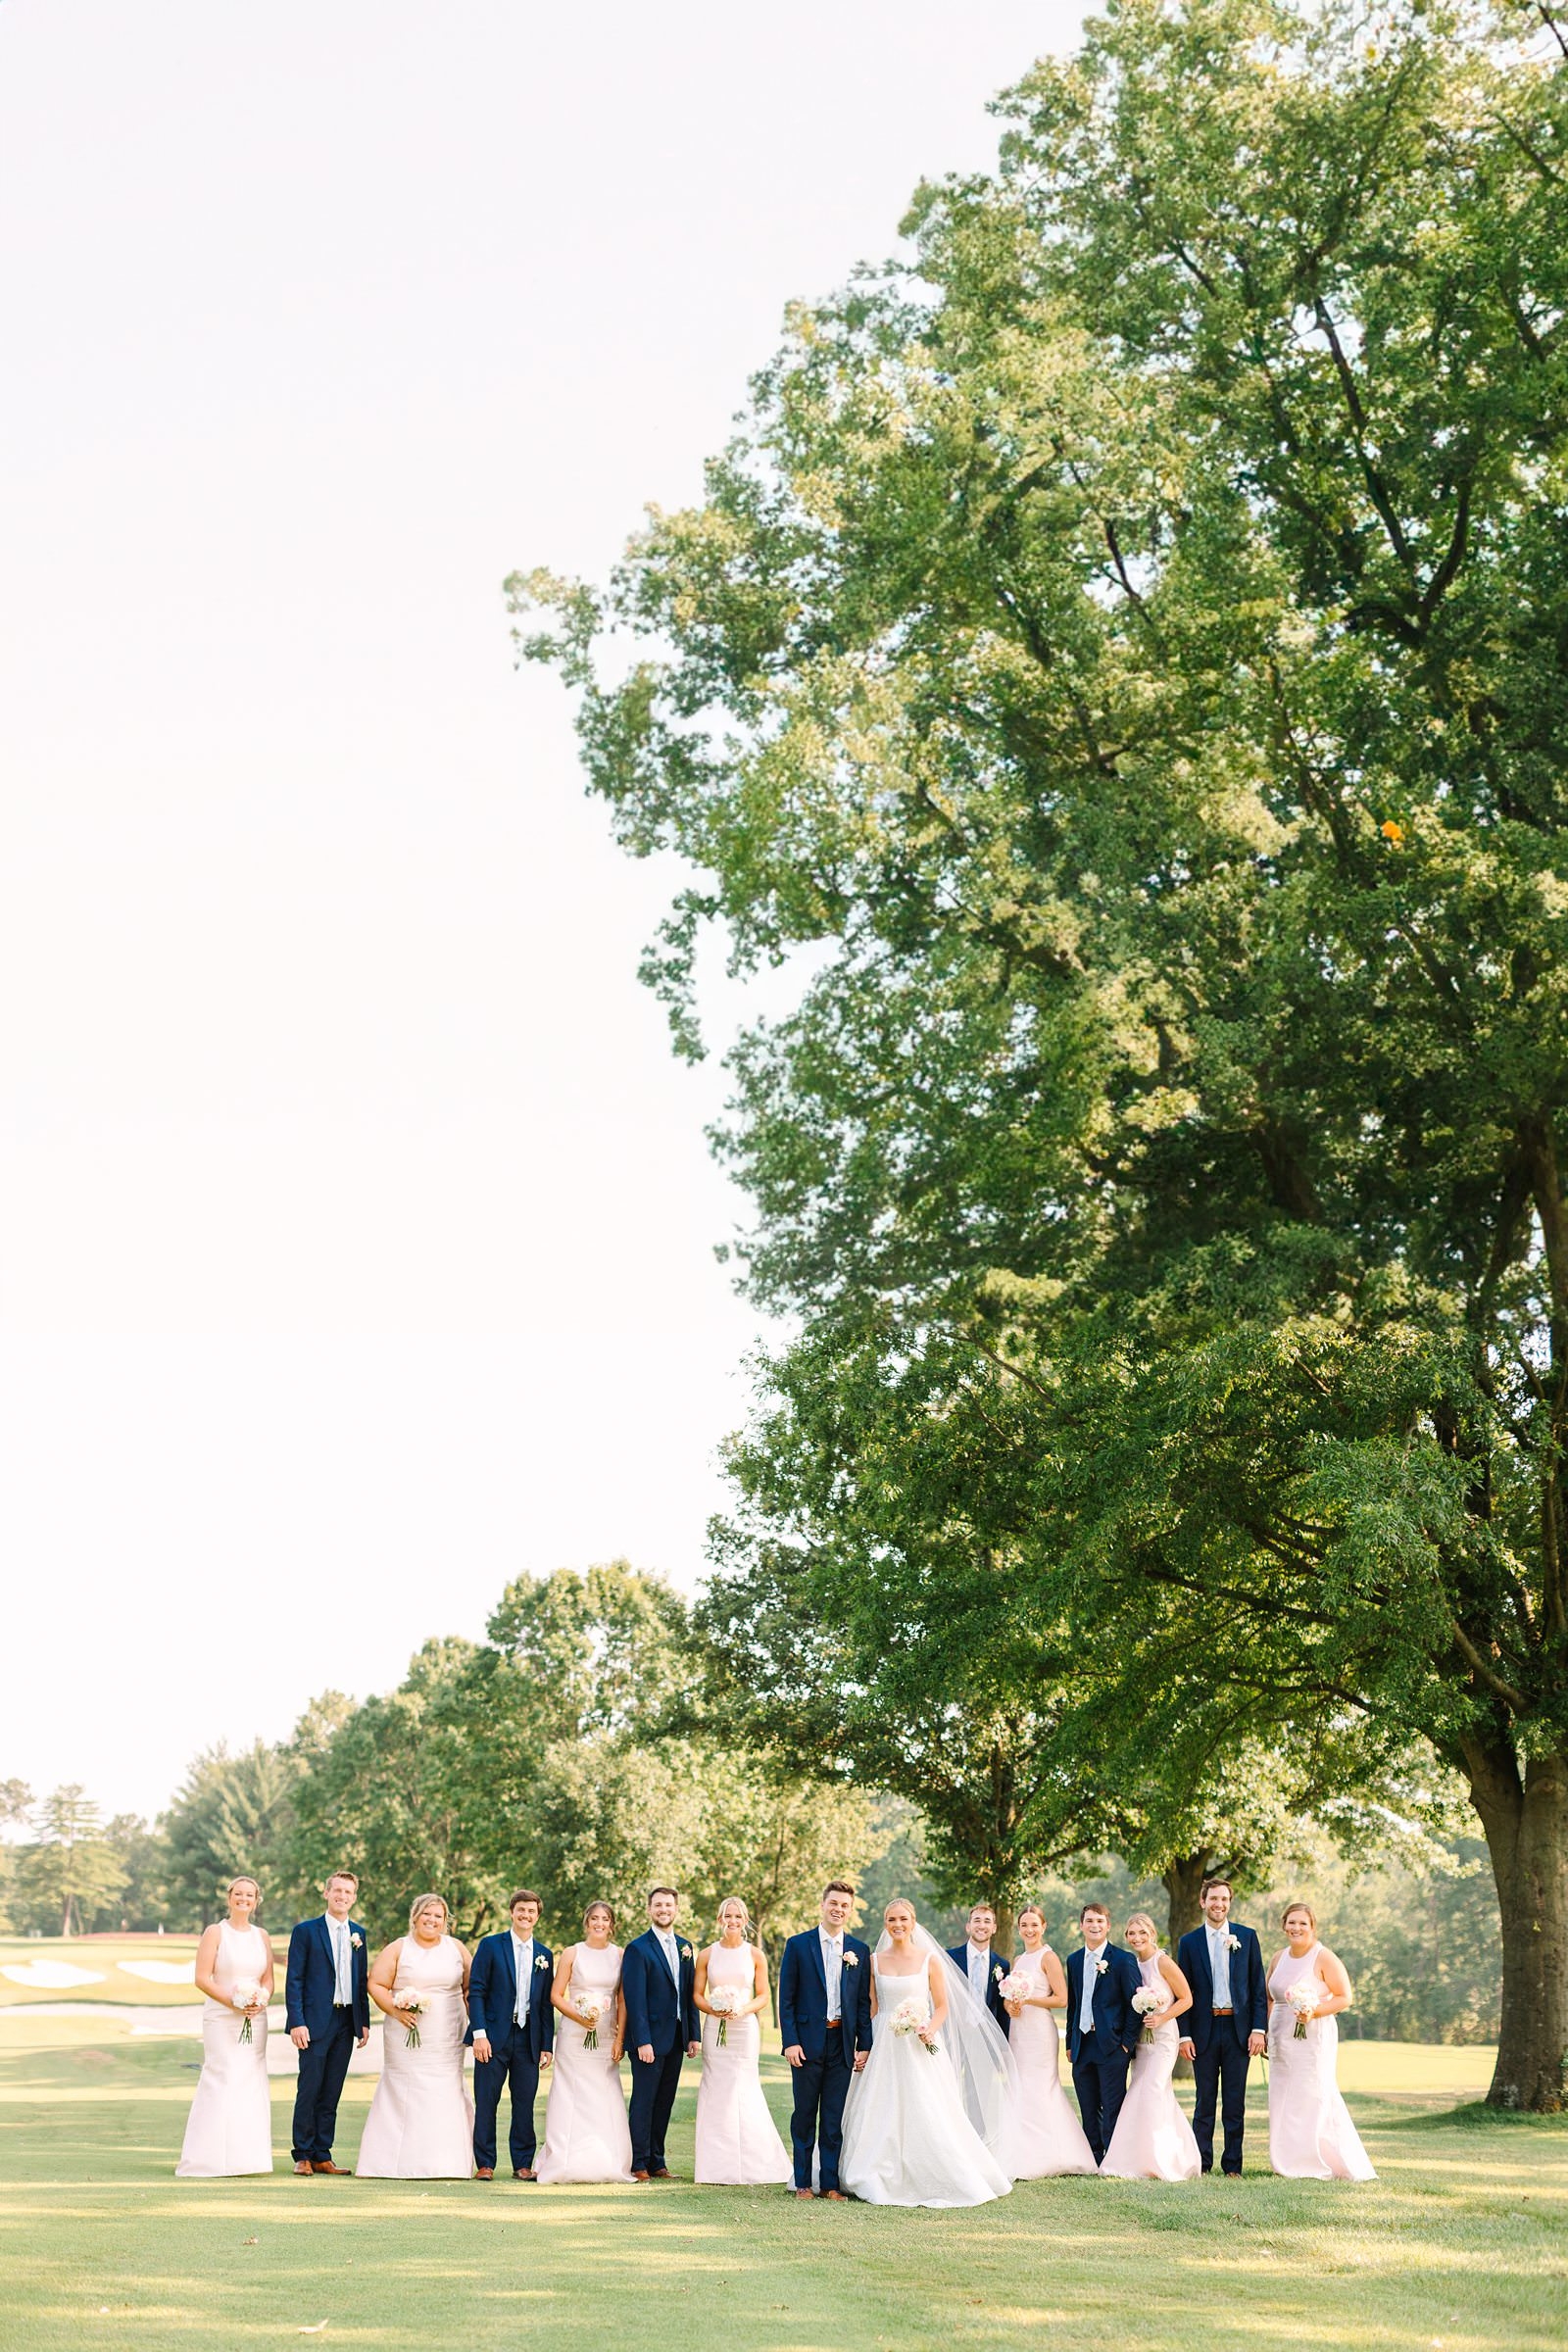 An Evansville Country Club Wedding | Ashley and Beau | Bret and Brandie Photography178.jpg